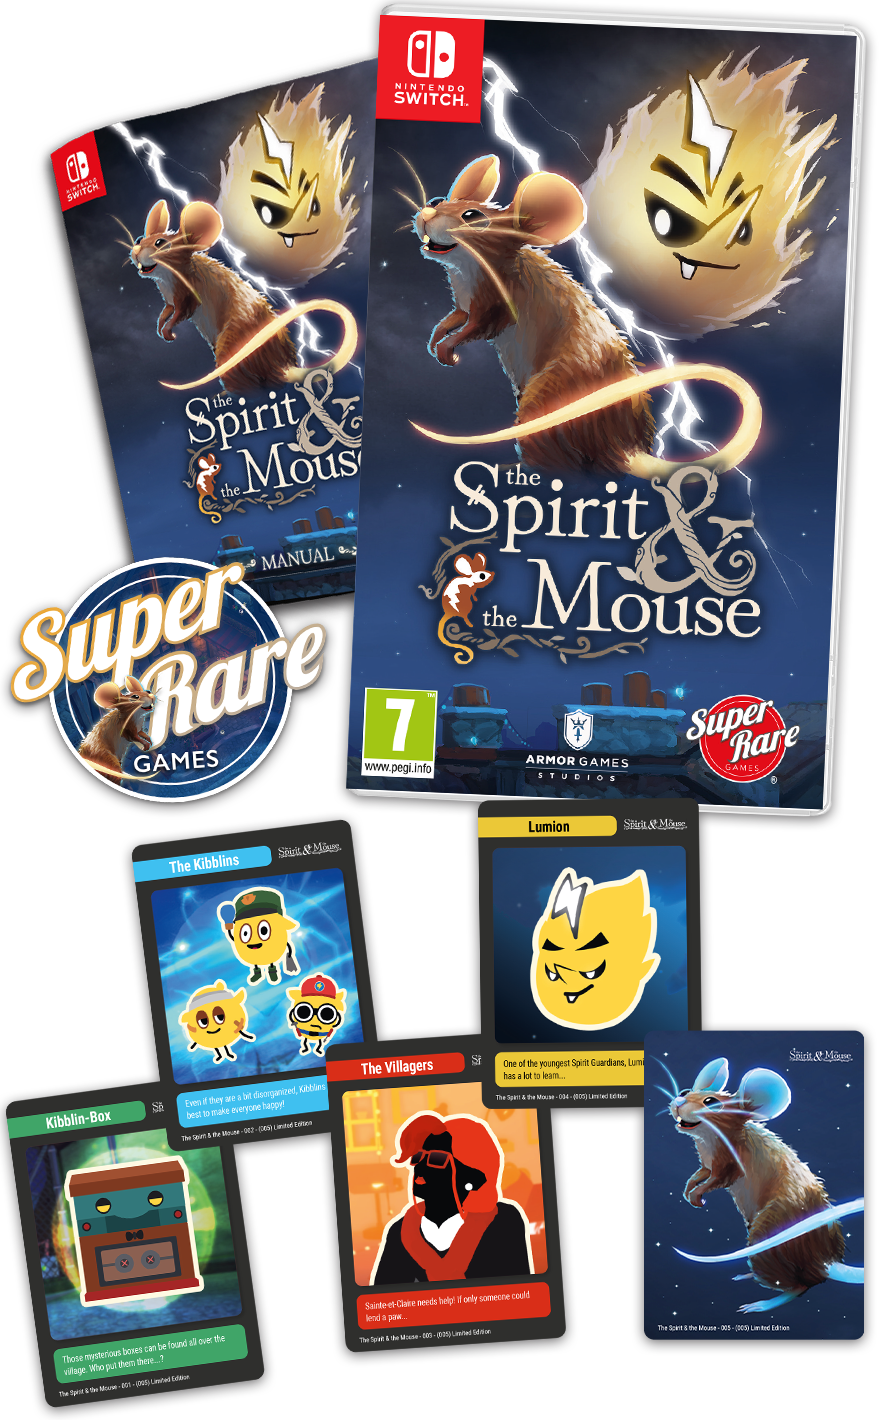 SRG#89: Spirit Mouse The & Super Games – Rare (Switch)